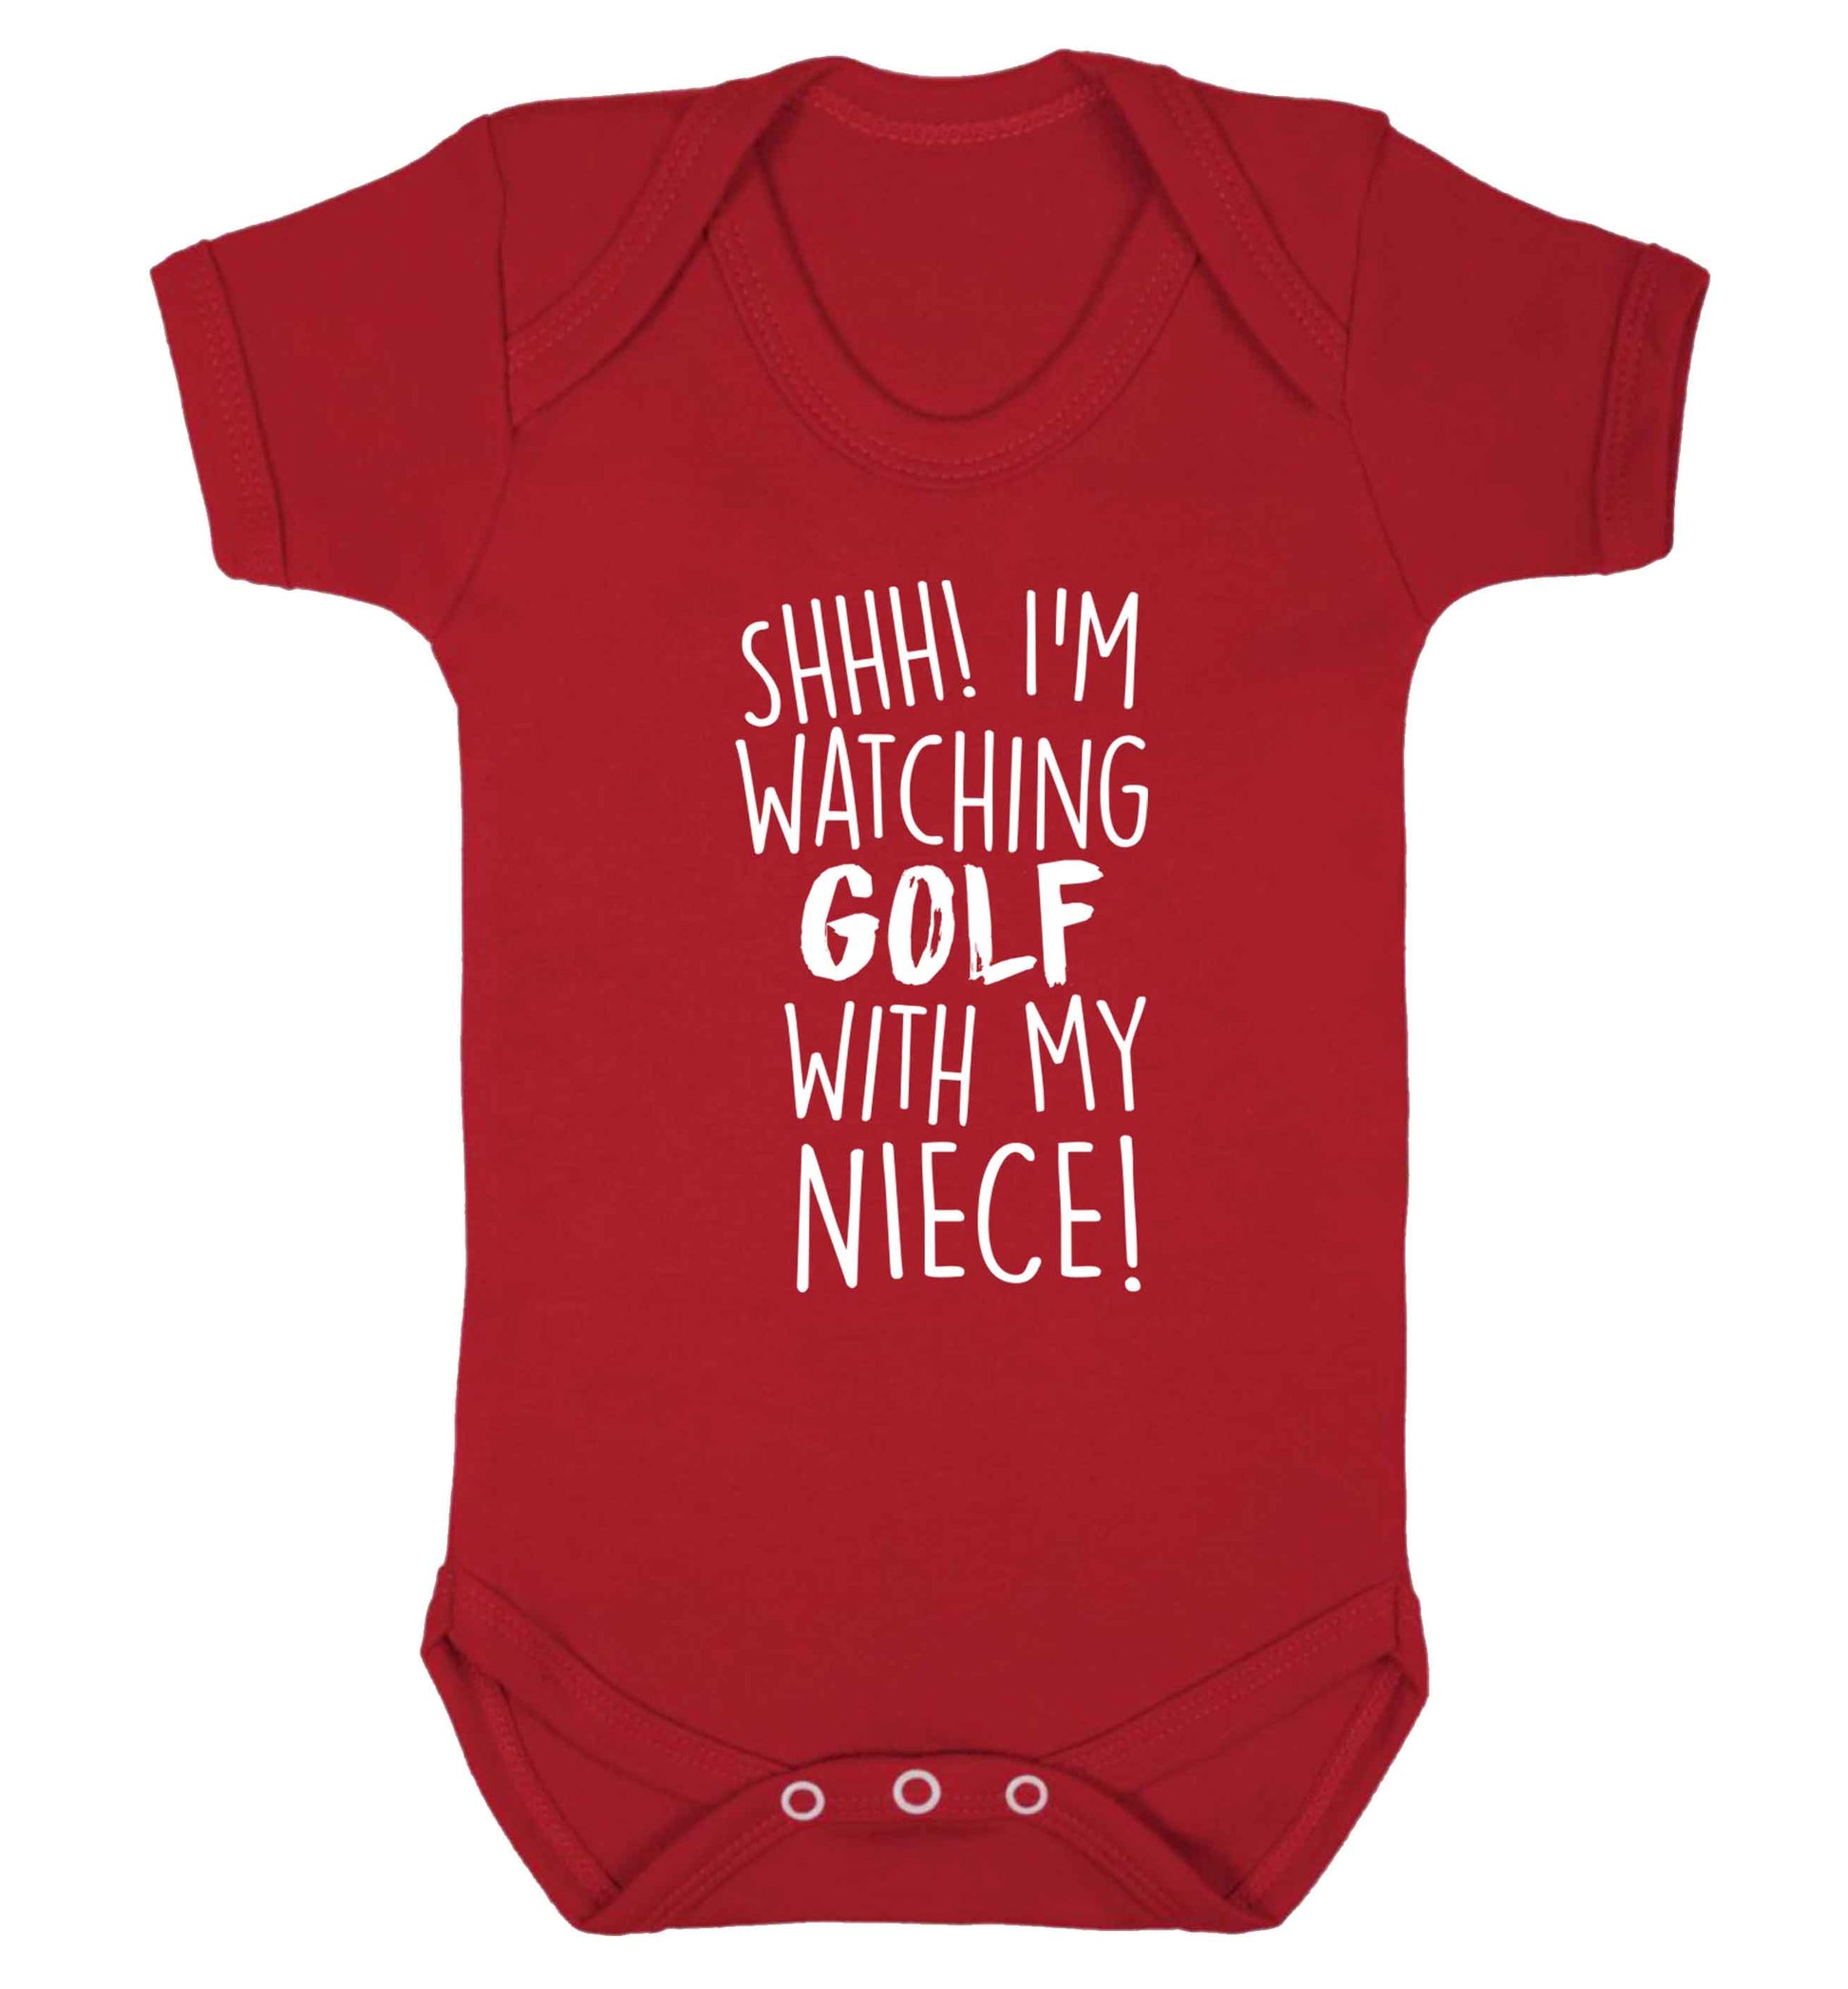 Shh I'm watching golf with my niece Baby Vest red 18-24 months